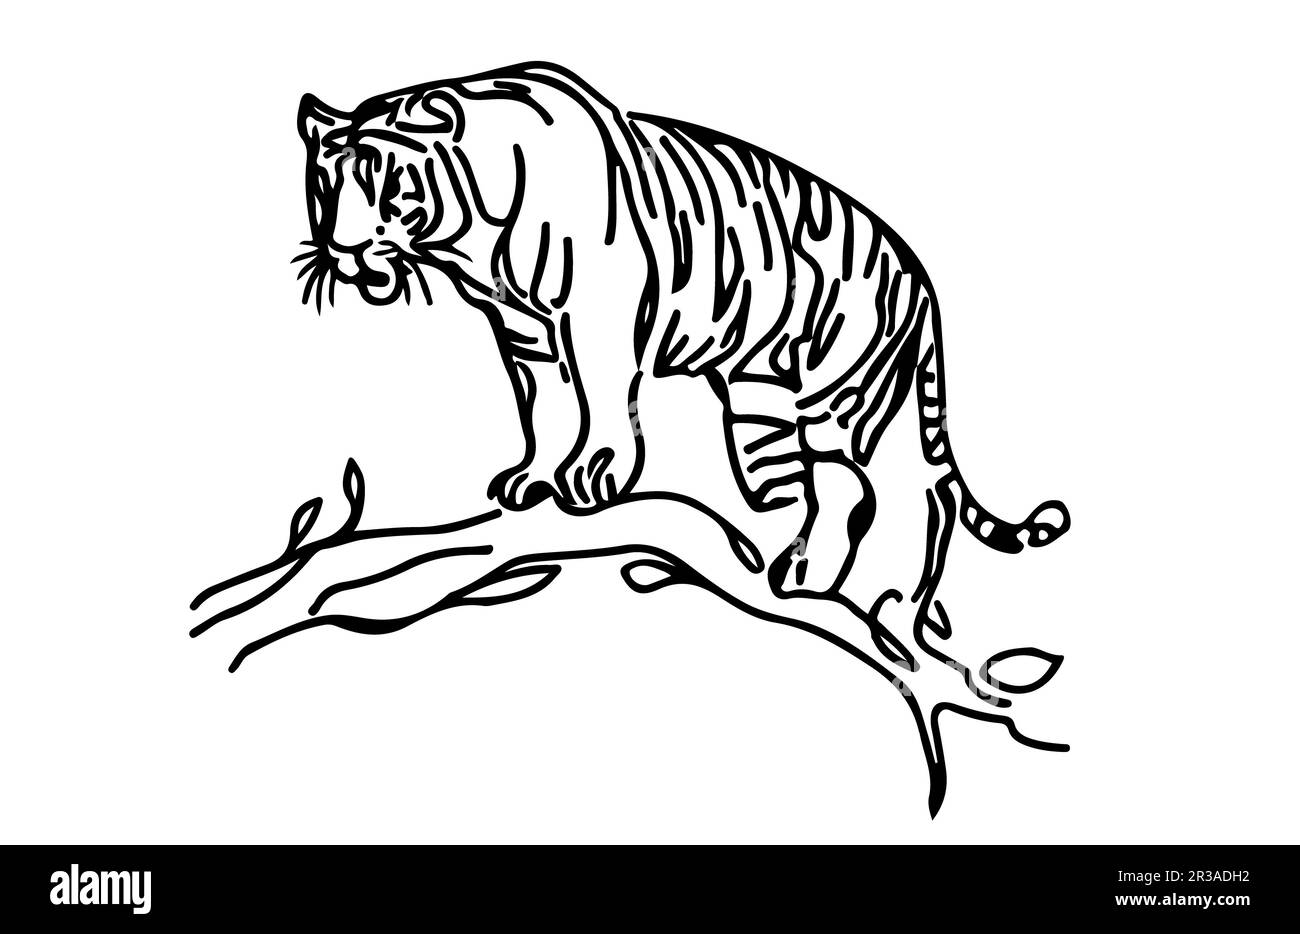 Tiger line art vector silhouette Stock Photo - Alamy, bengal tiger